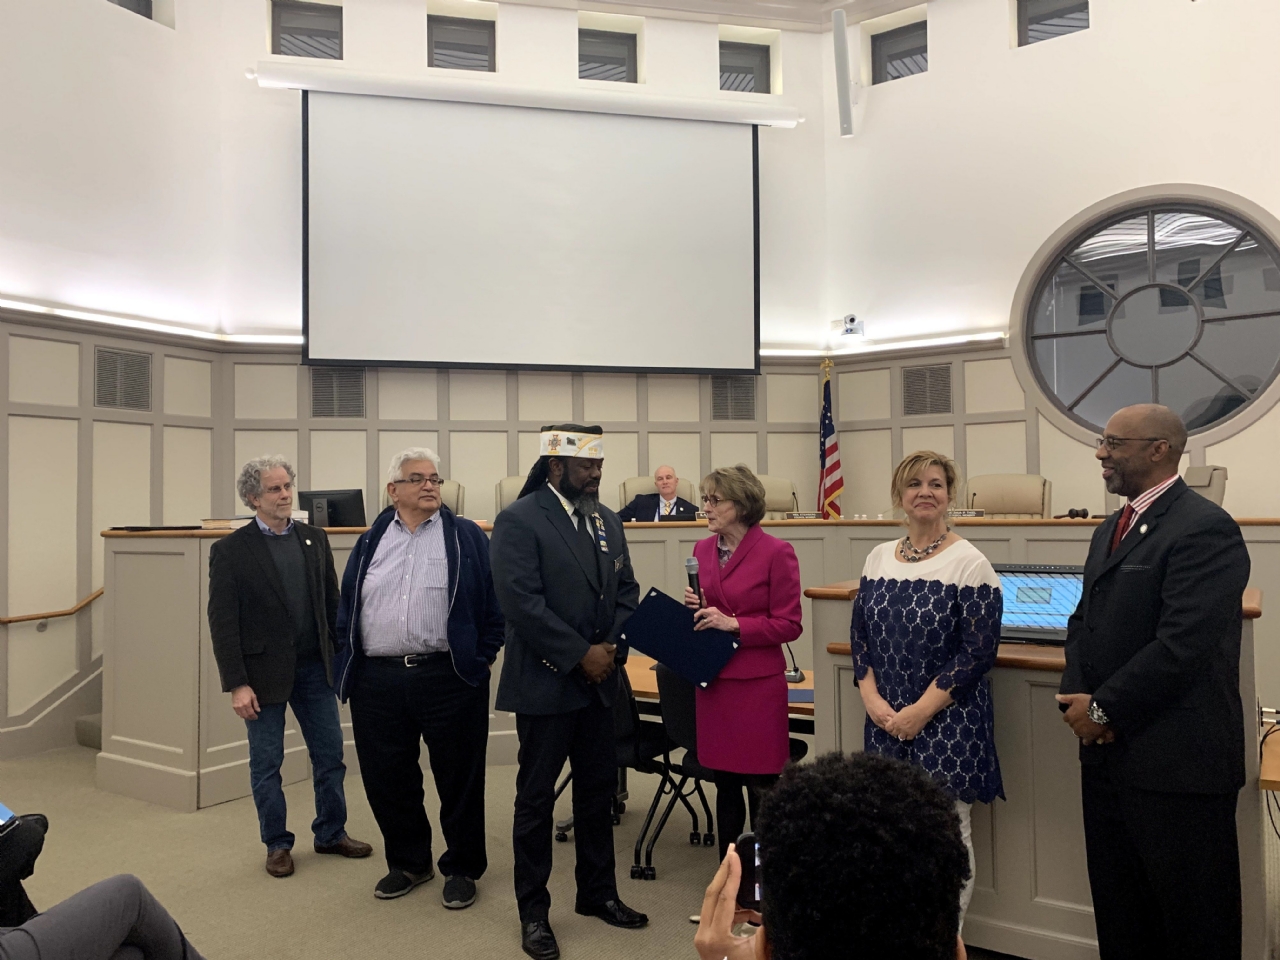 Commander Ray recognized by the Town of Leesburg for his contribution to civic activities and for being the first and only African American of west Indian origin to be post commander of the VFW Post 1177.